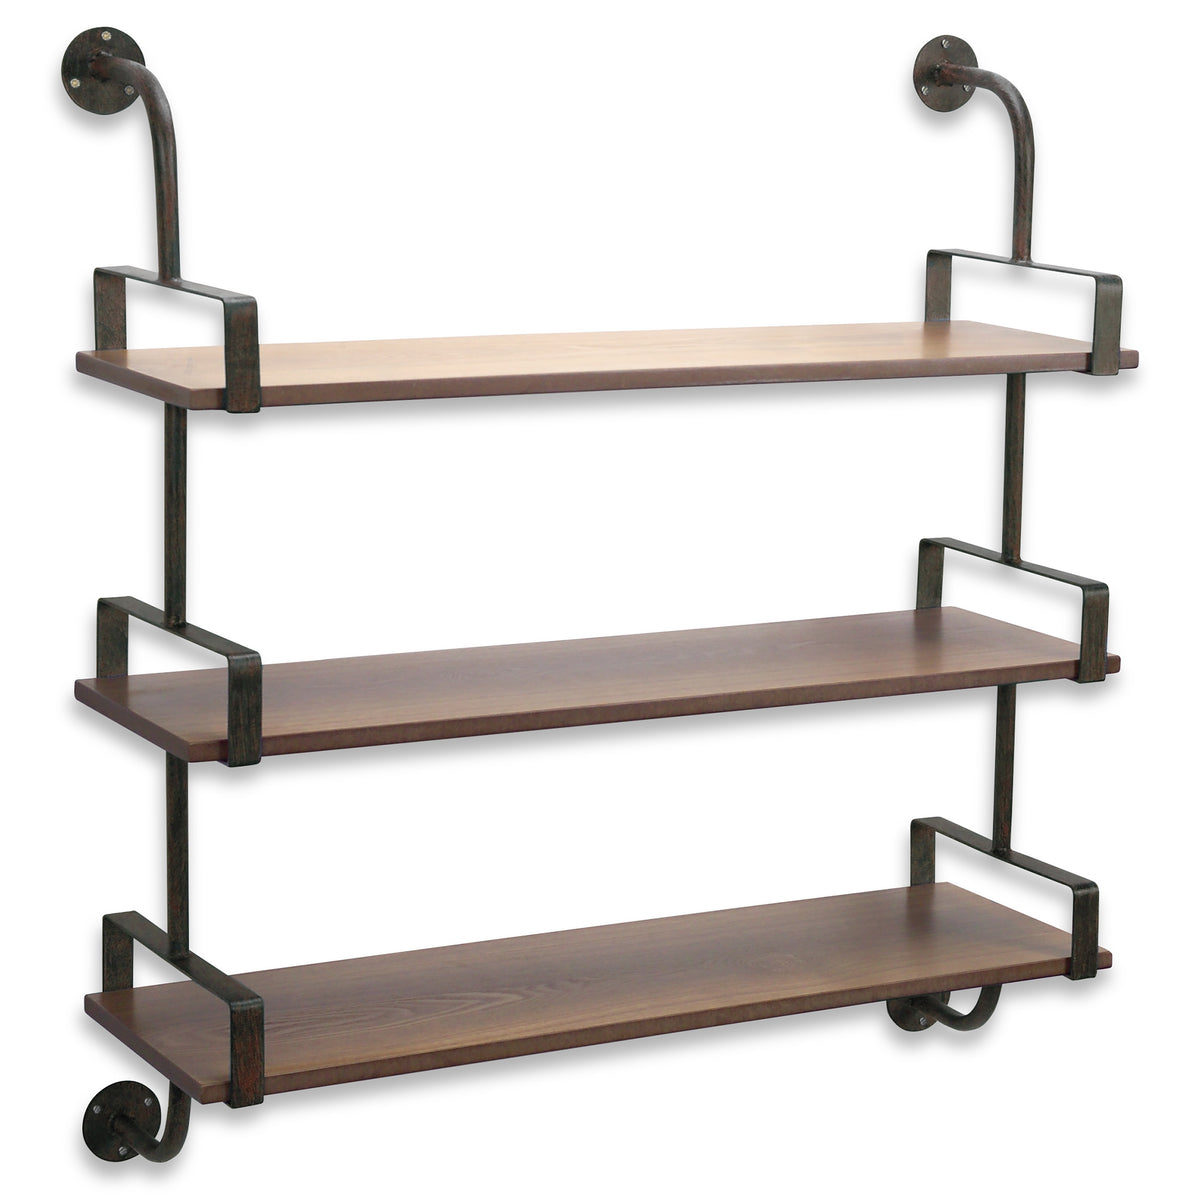 A triple wall shelving unit with iron brackets and wooden shelves. 